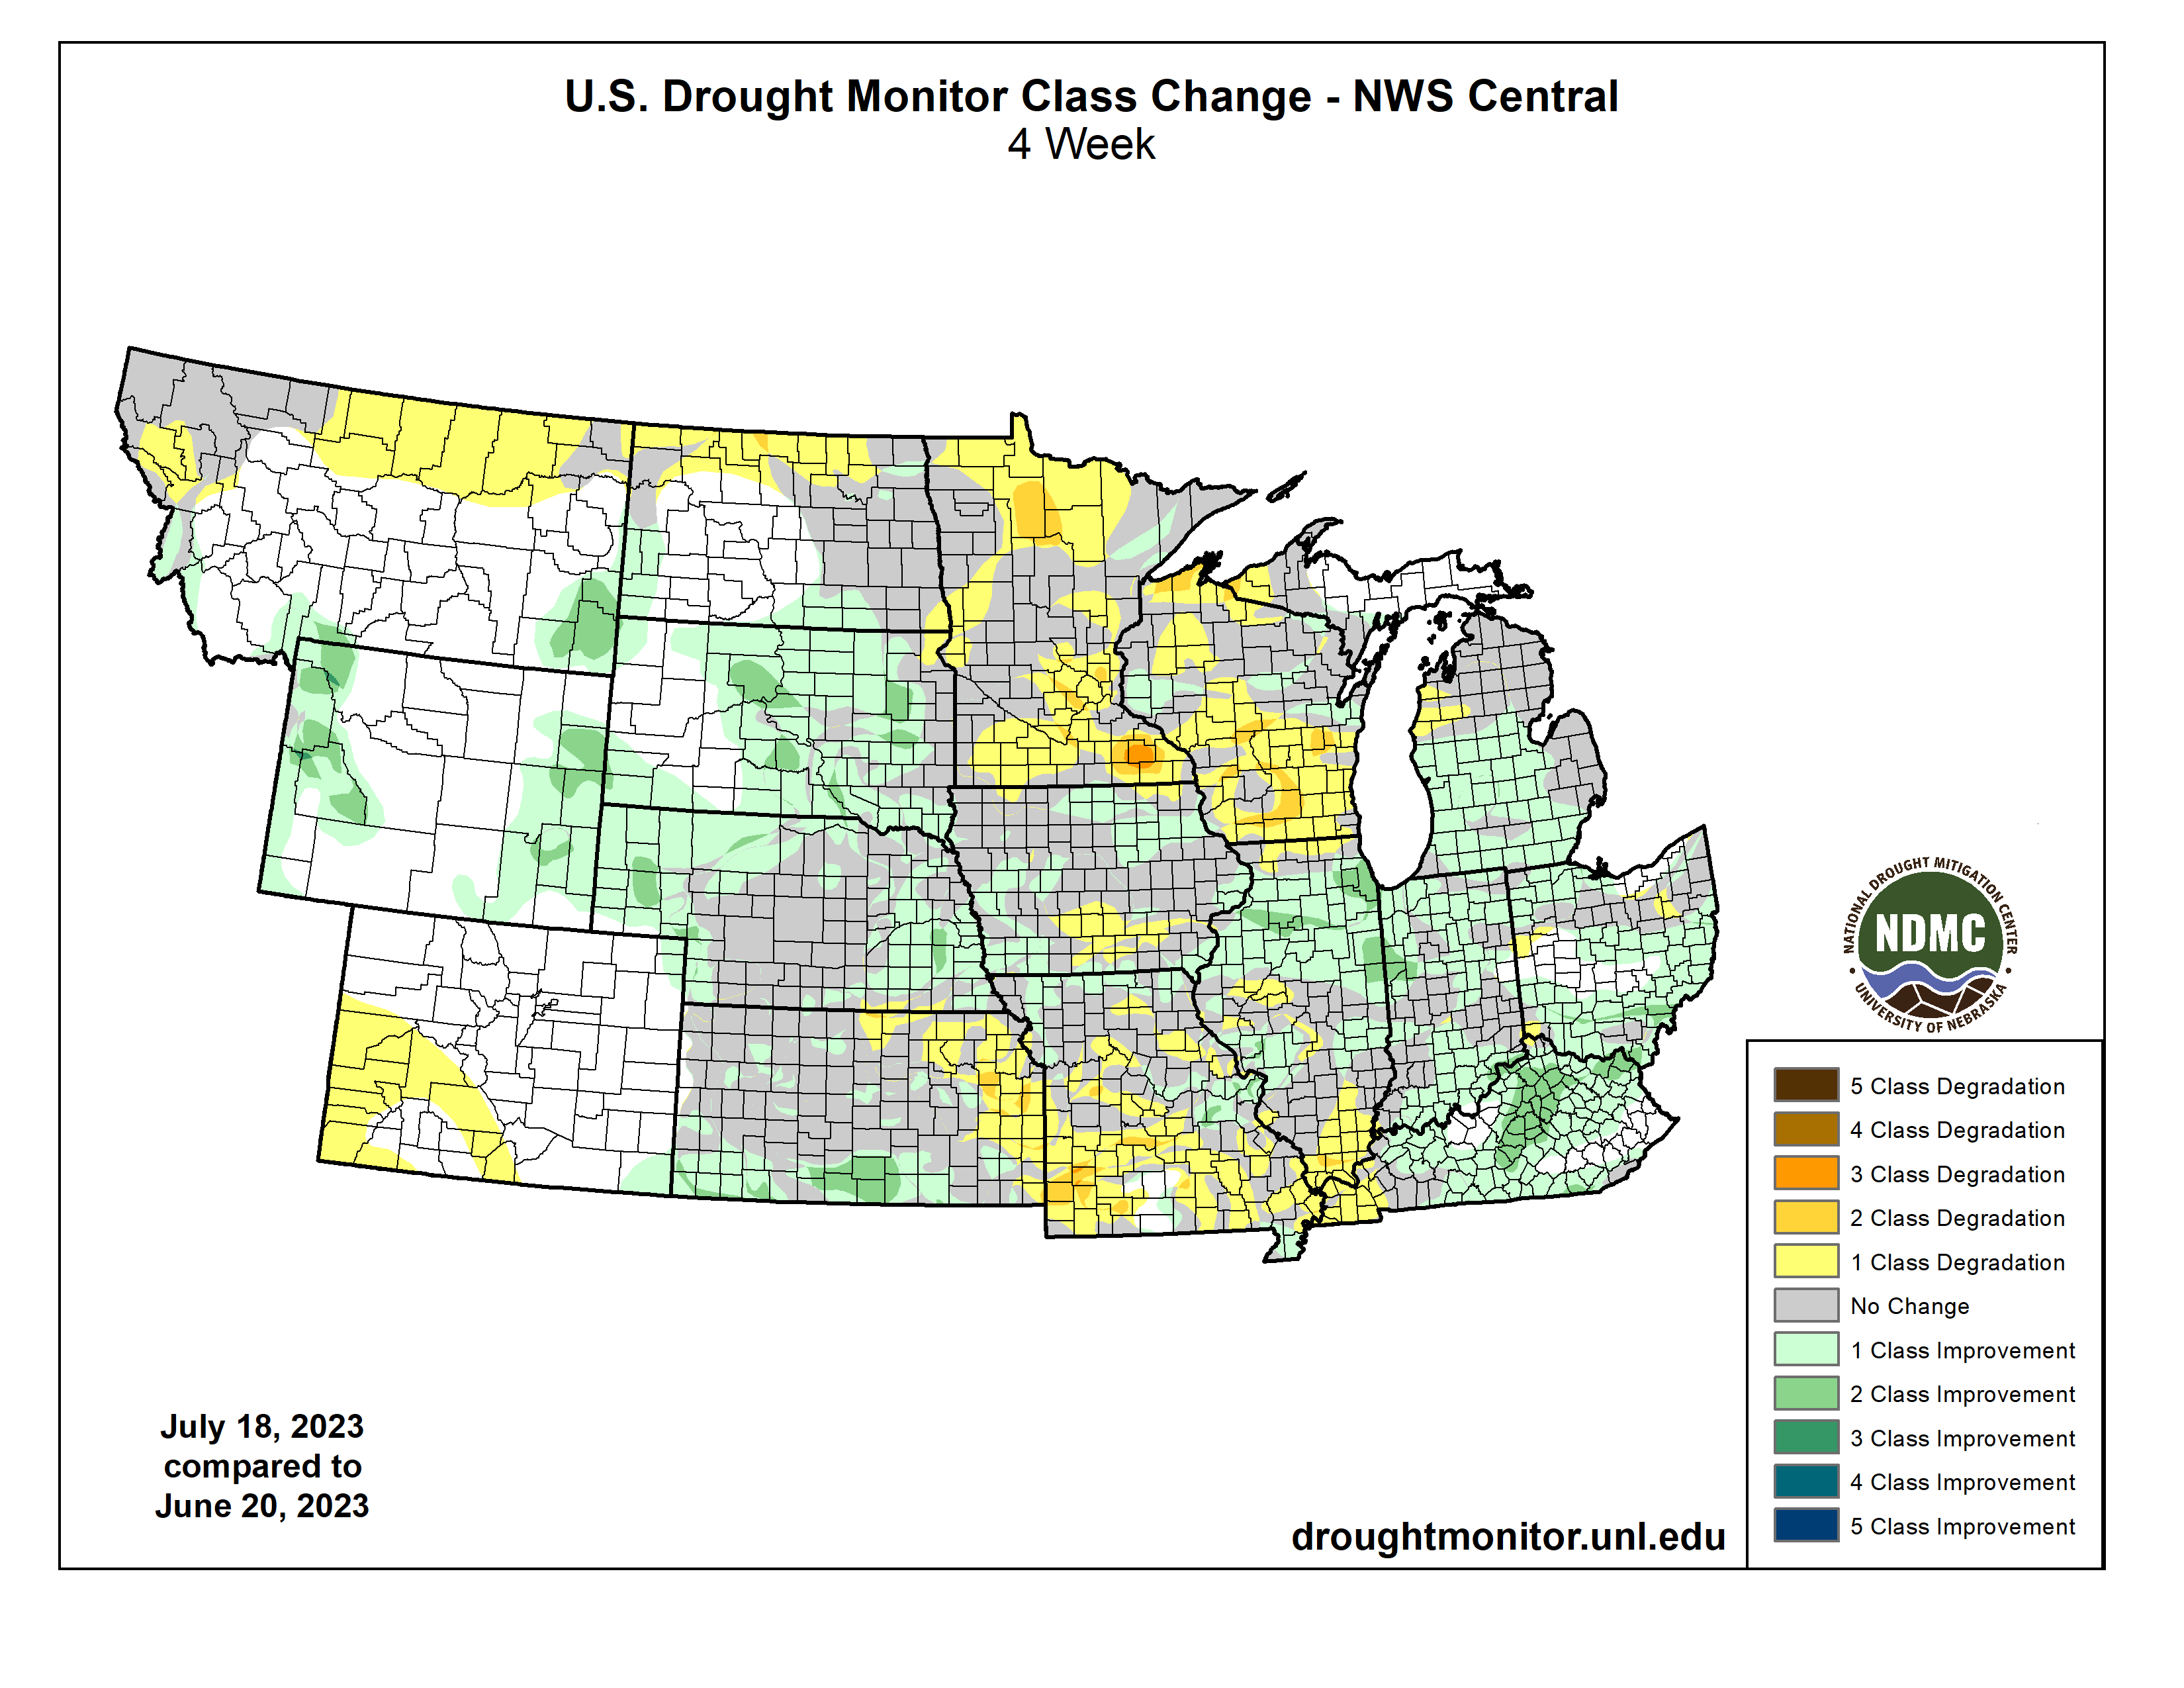 From June 20 to July 18, 2023, drought has improved by 1-2 categories on the U.S. Drought Monitor across much of the North Central U.S. However, conditions have worsened in northern Montana and North Dakota, Minnesota, Wisconsin, Missouri, western Colorado, and eastern Kansas.